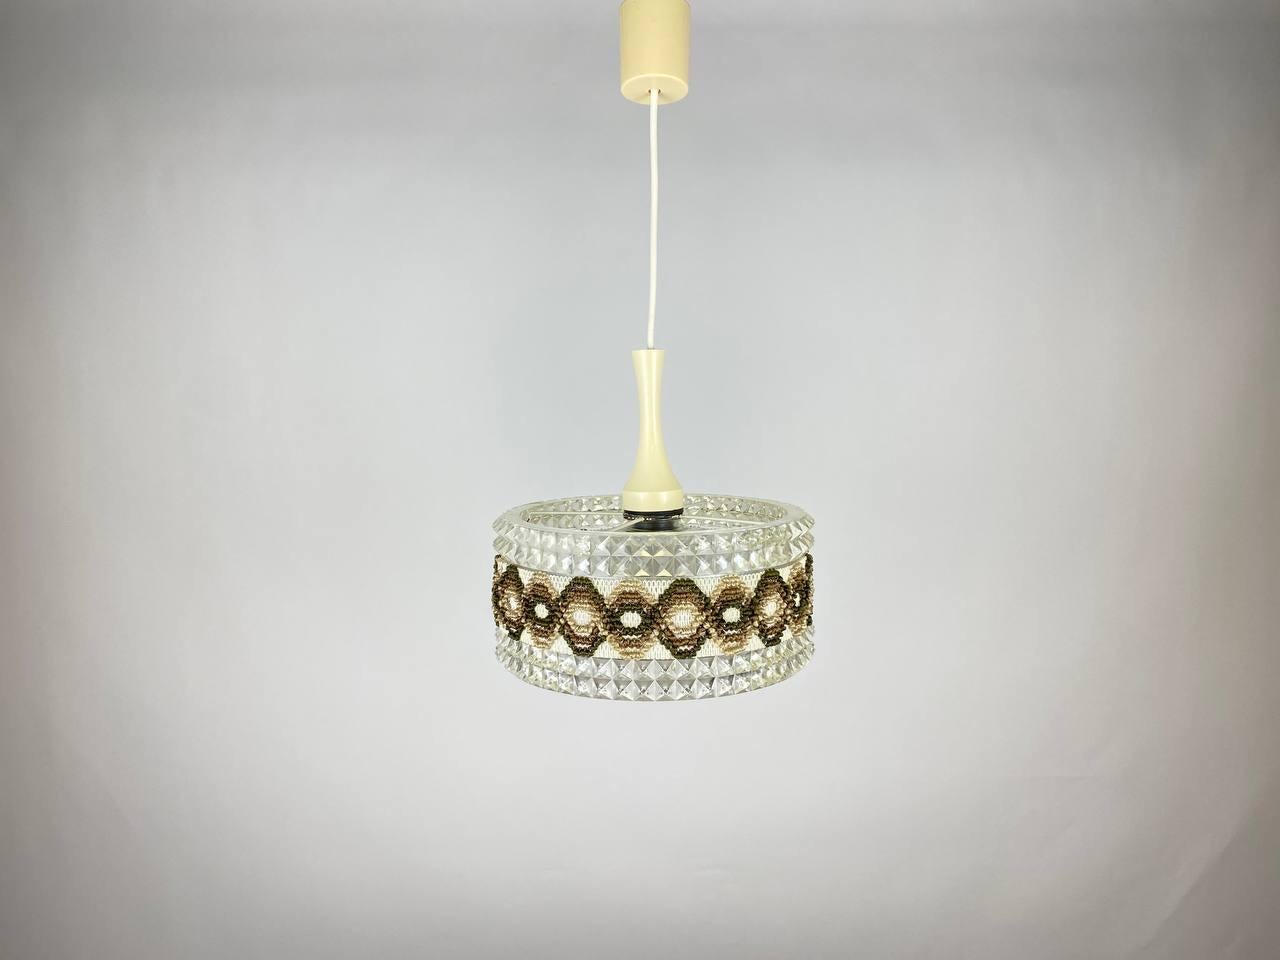 Plexiglas and glass chandelier from ME manufactory. 

Circa 1970’s. 

Pursue elegant style in light luxury and enjoy the comfortable Hygge style. The plexiglas lamp body structure is integrated with the textile decoration.

Inside the main